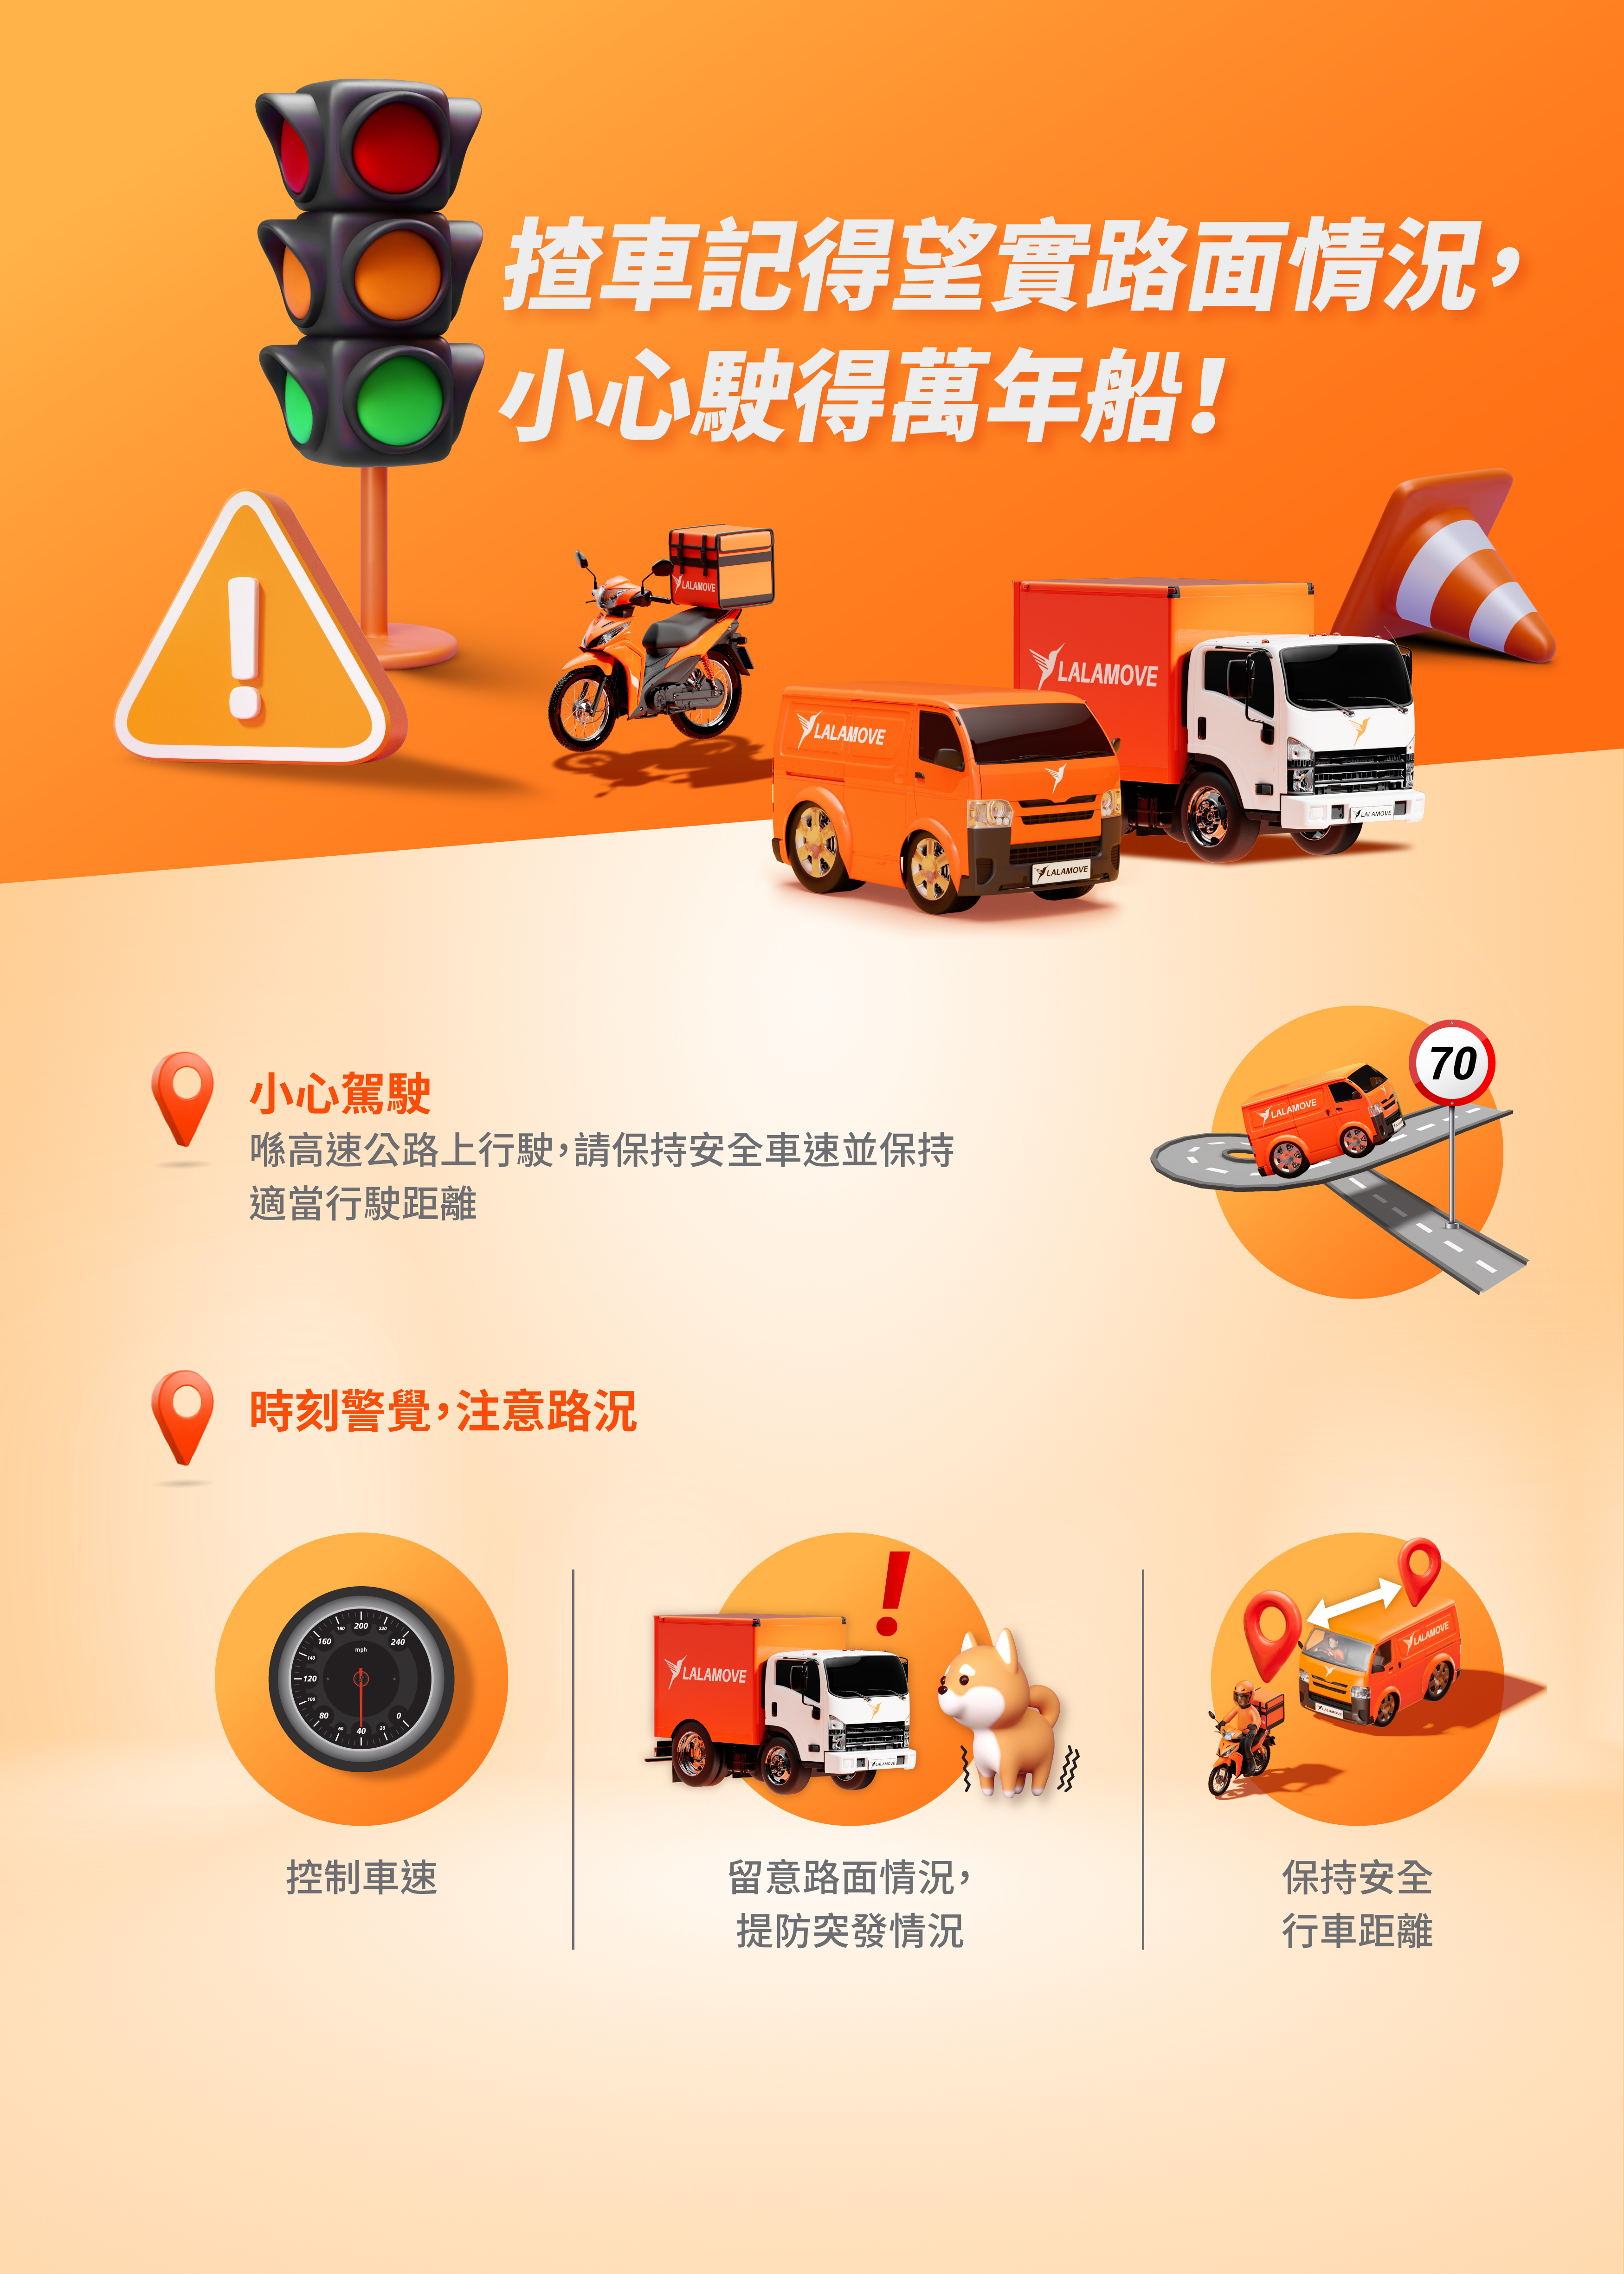 HK_Driver Safety comms assets_AW_TC_20221208-06